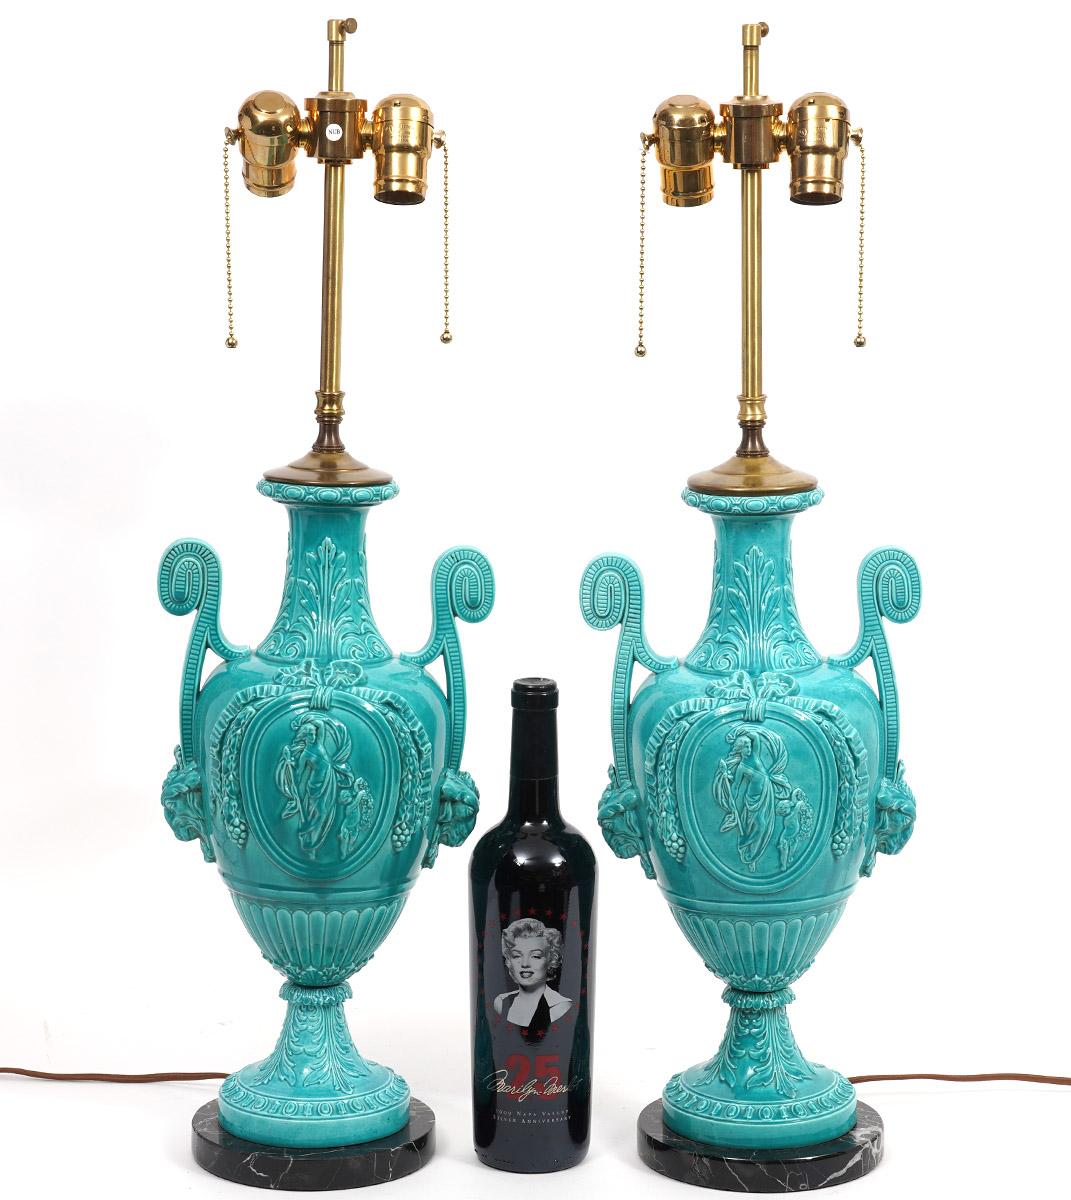 19th Century Pair of Italian Neoclassical Majolica Lamps with High Crater Rolled Handles